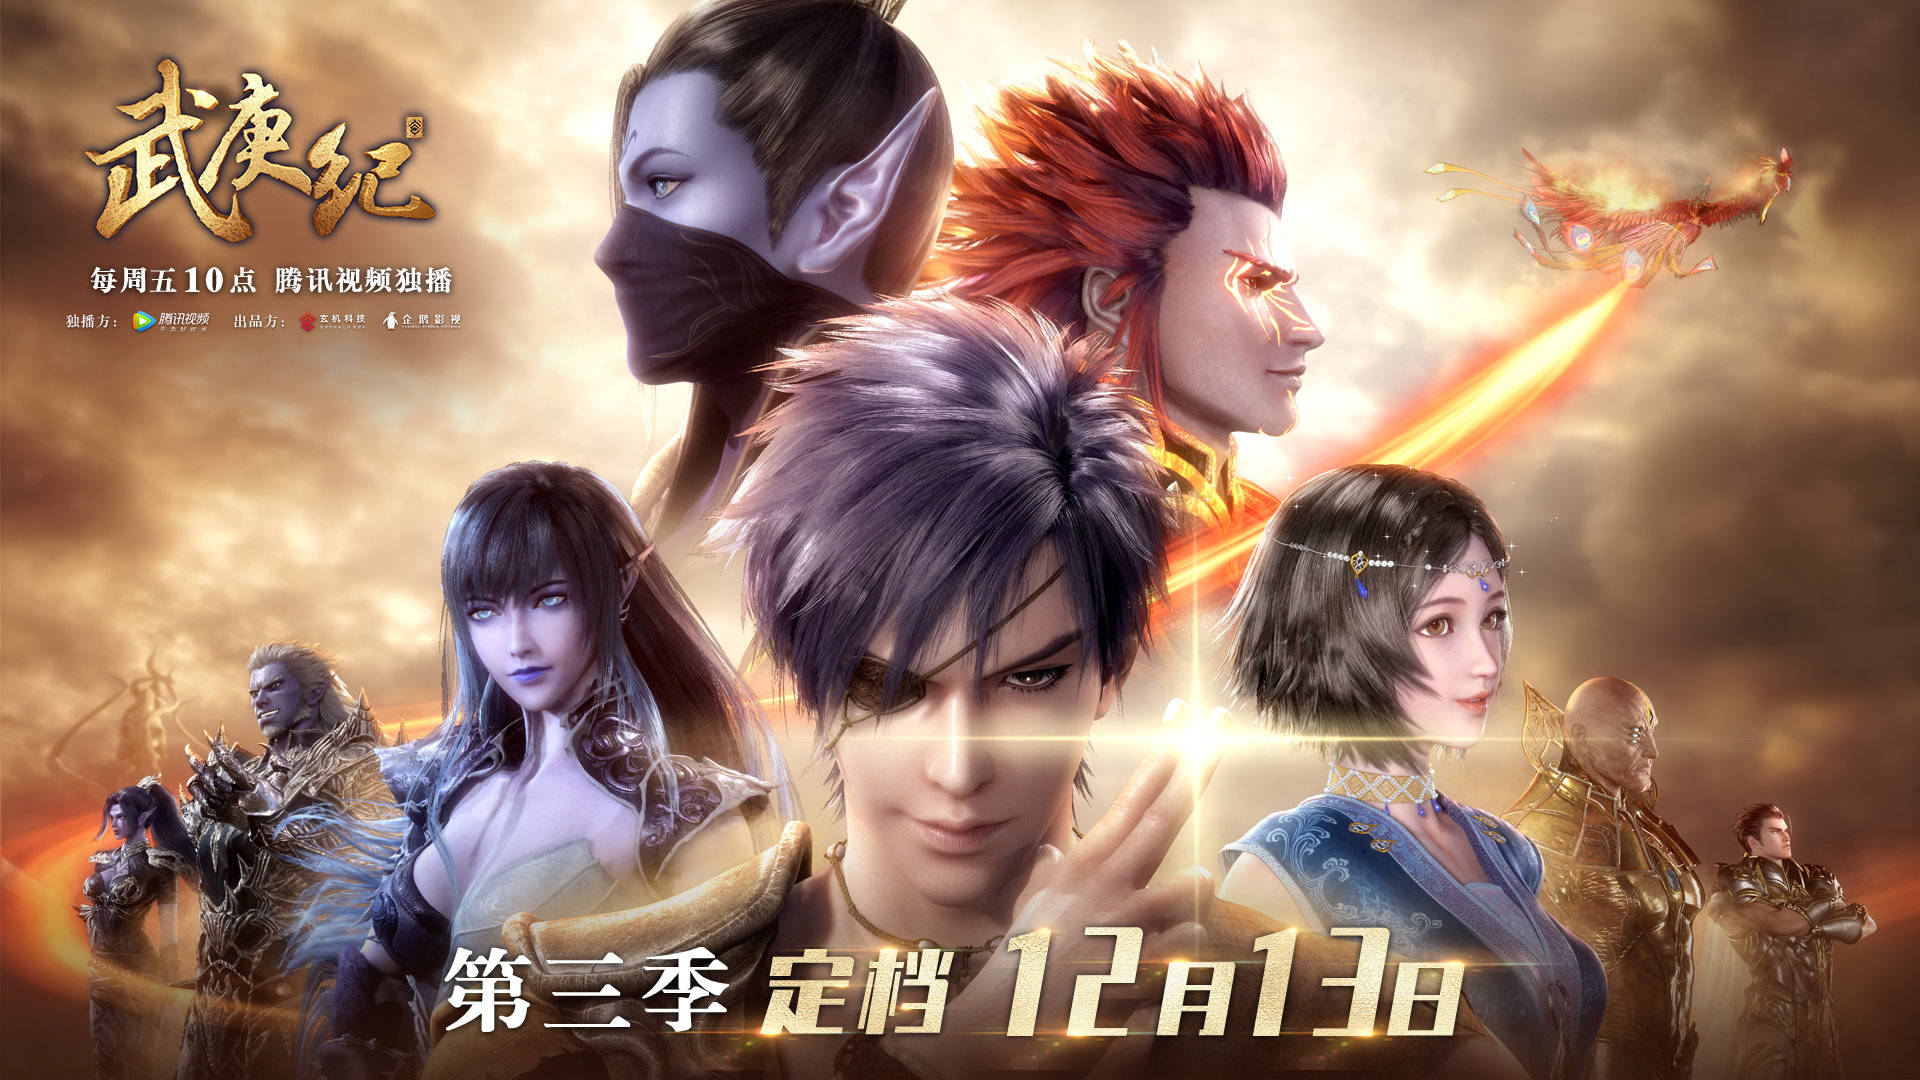 Cuchallain those of you waiting for it Wu Geng Ji #武庚纪 season 3 finally has an airing date. December 13th it will begin release. It's nice to see Tencent